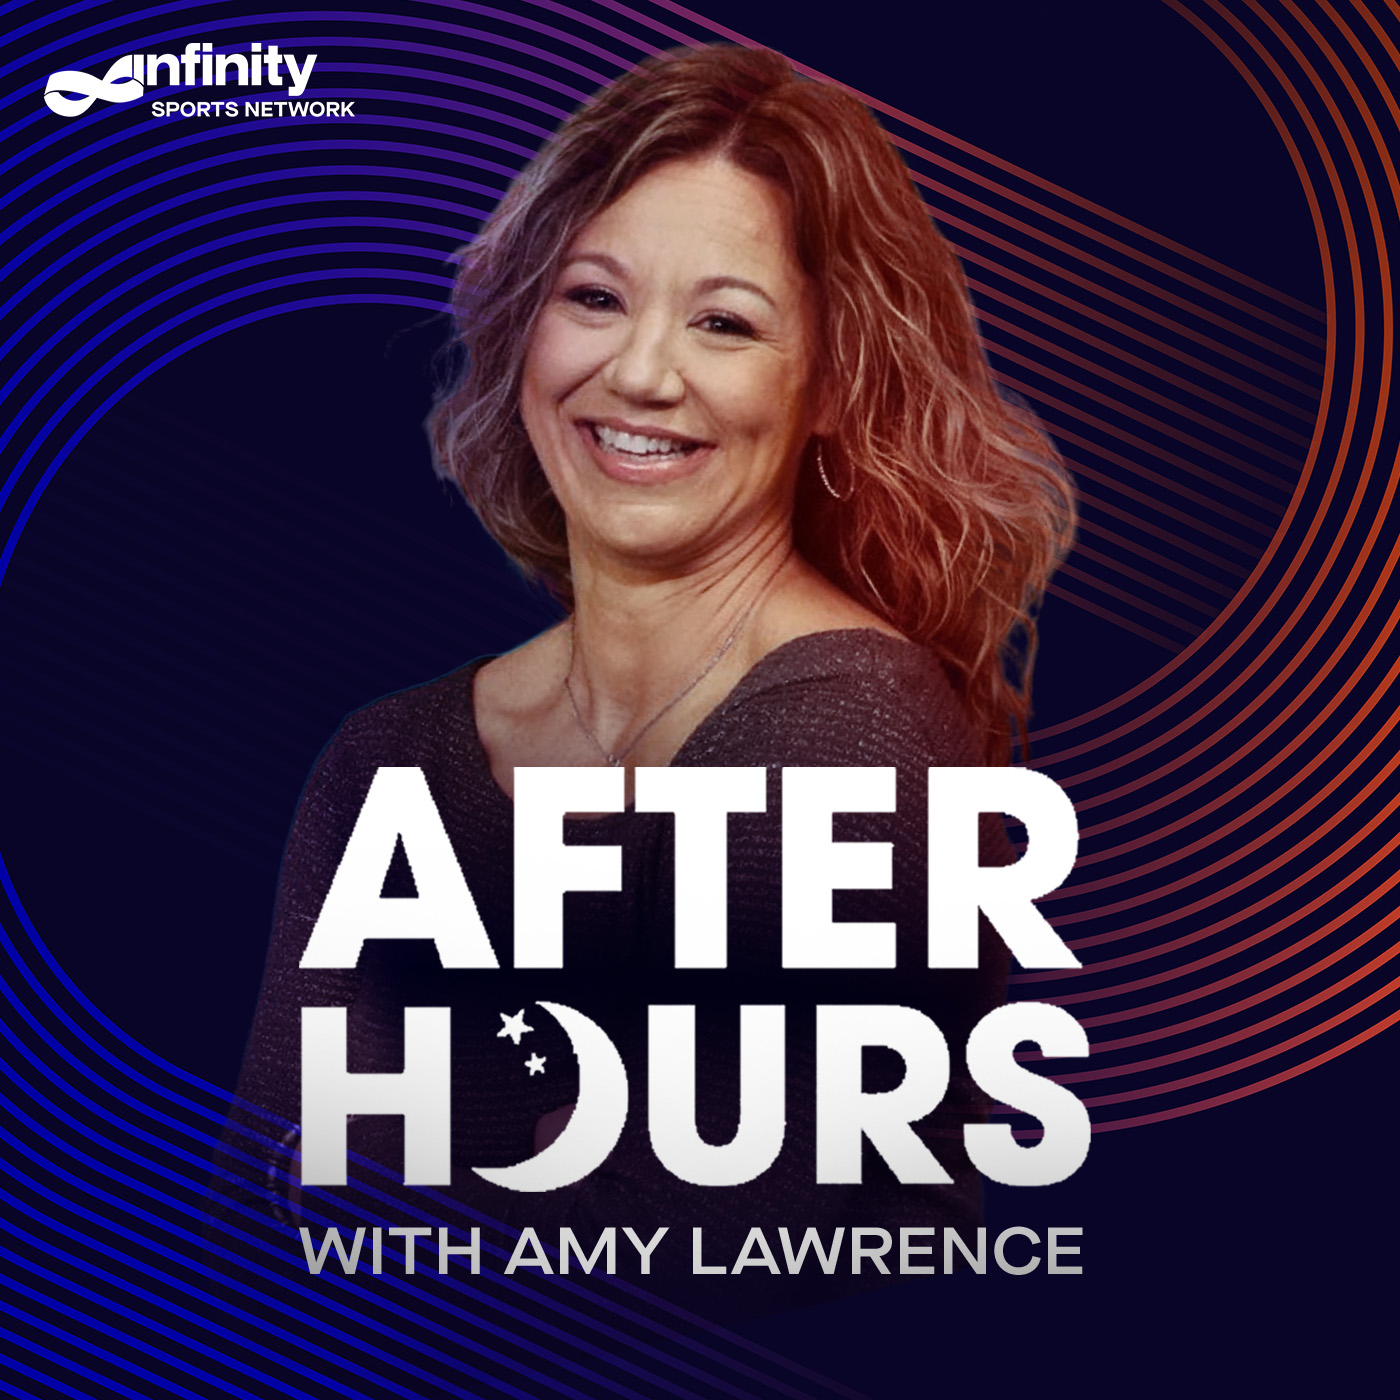 1-21-22 After Hours with Amy Lawrence PODCAST: Hour 2